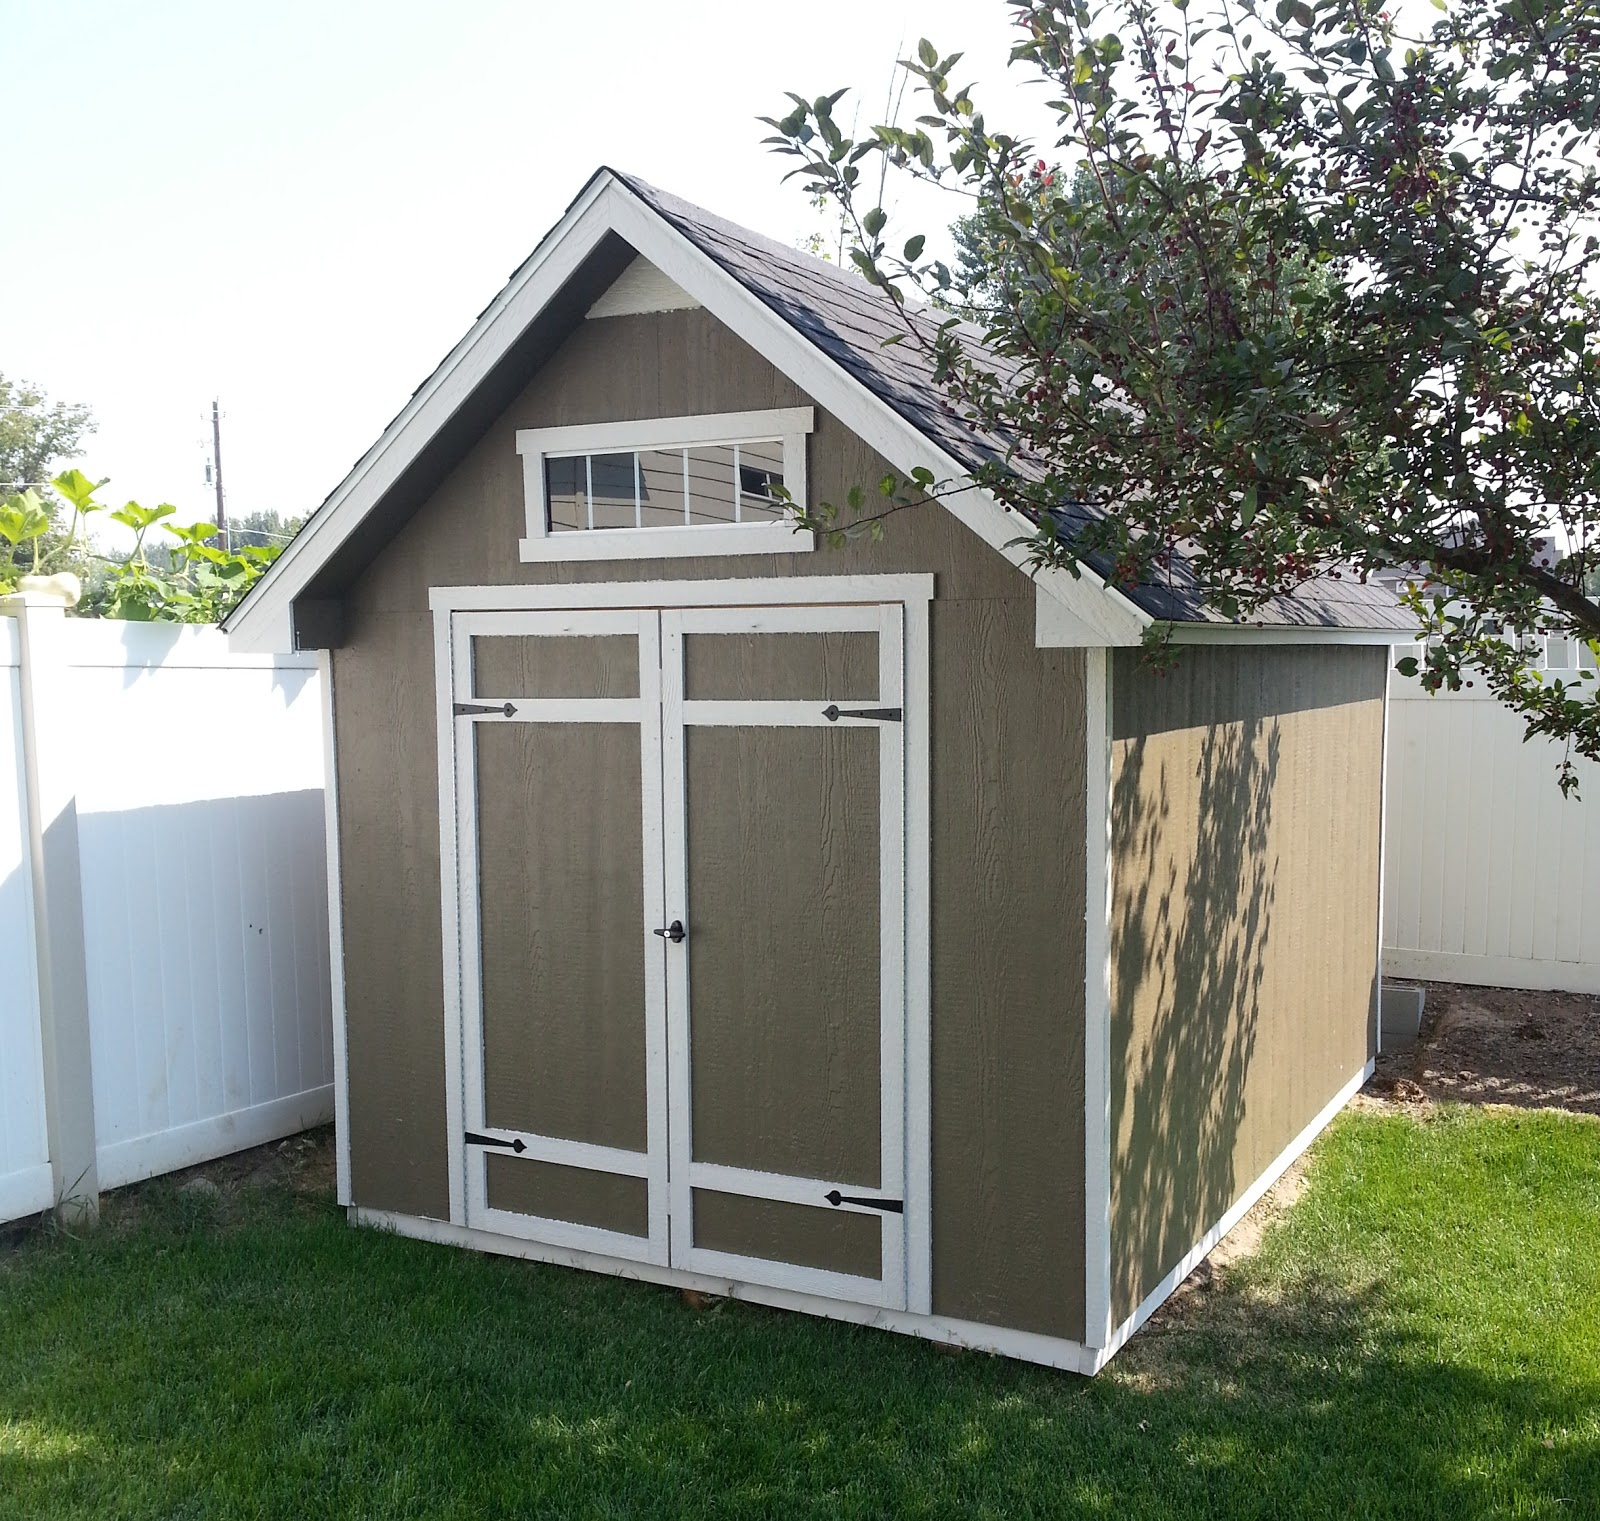 Costco Yardline Everton Shed Review Review Spew intended for proportions 1600 X 1521